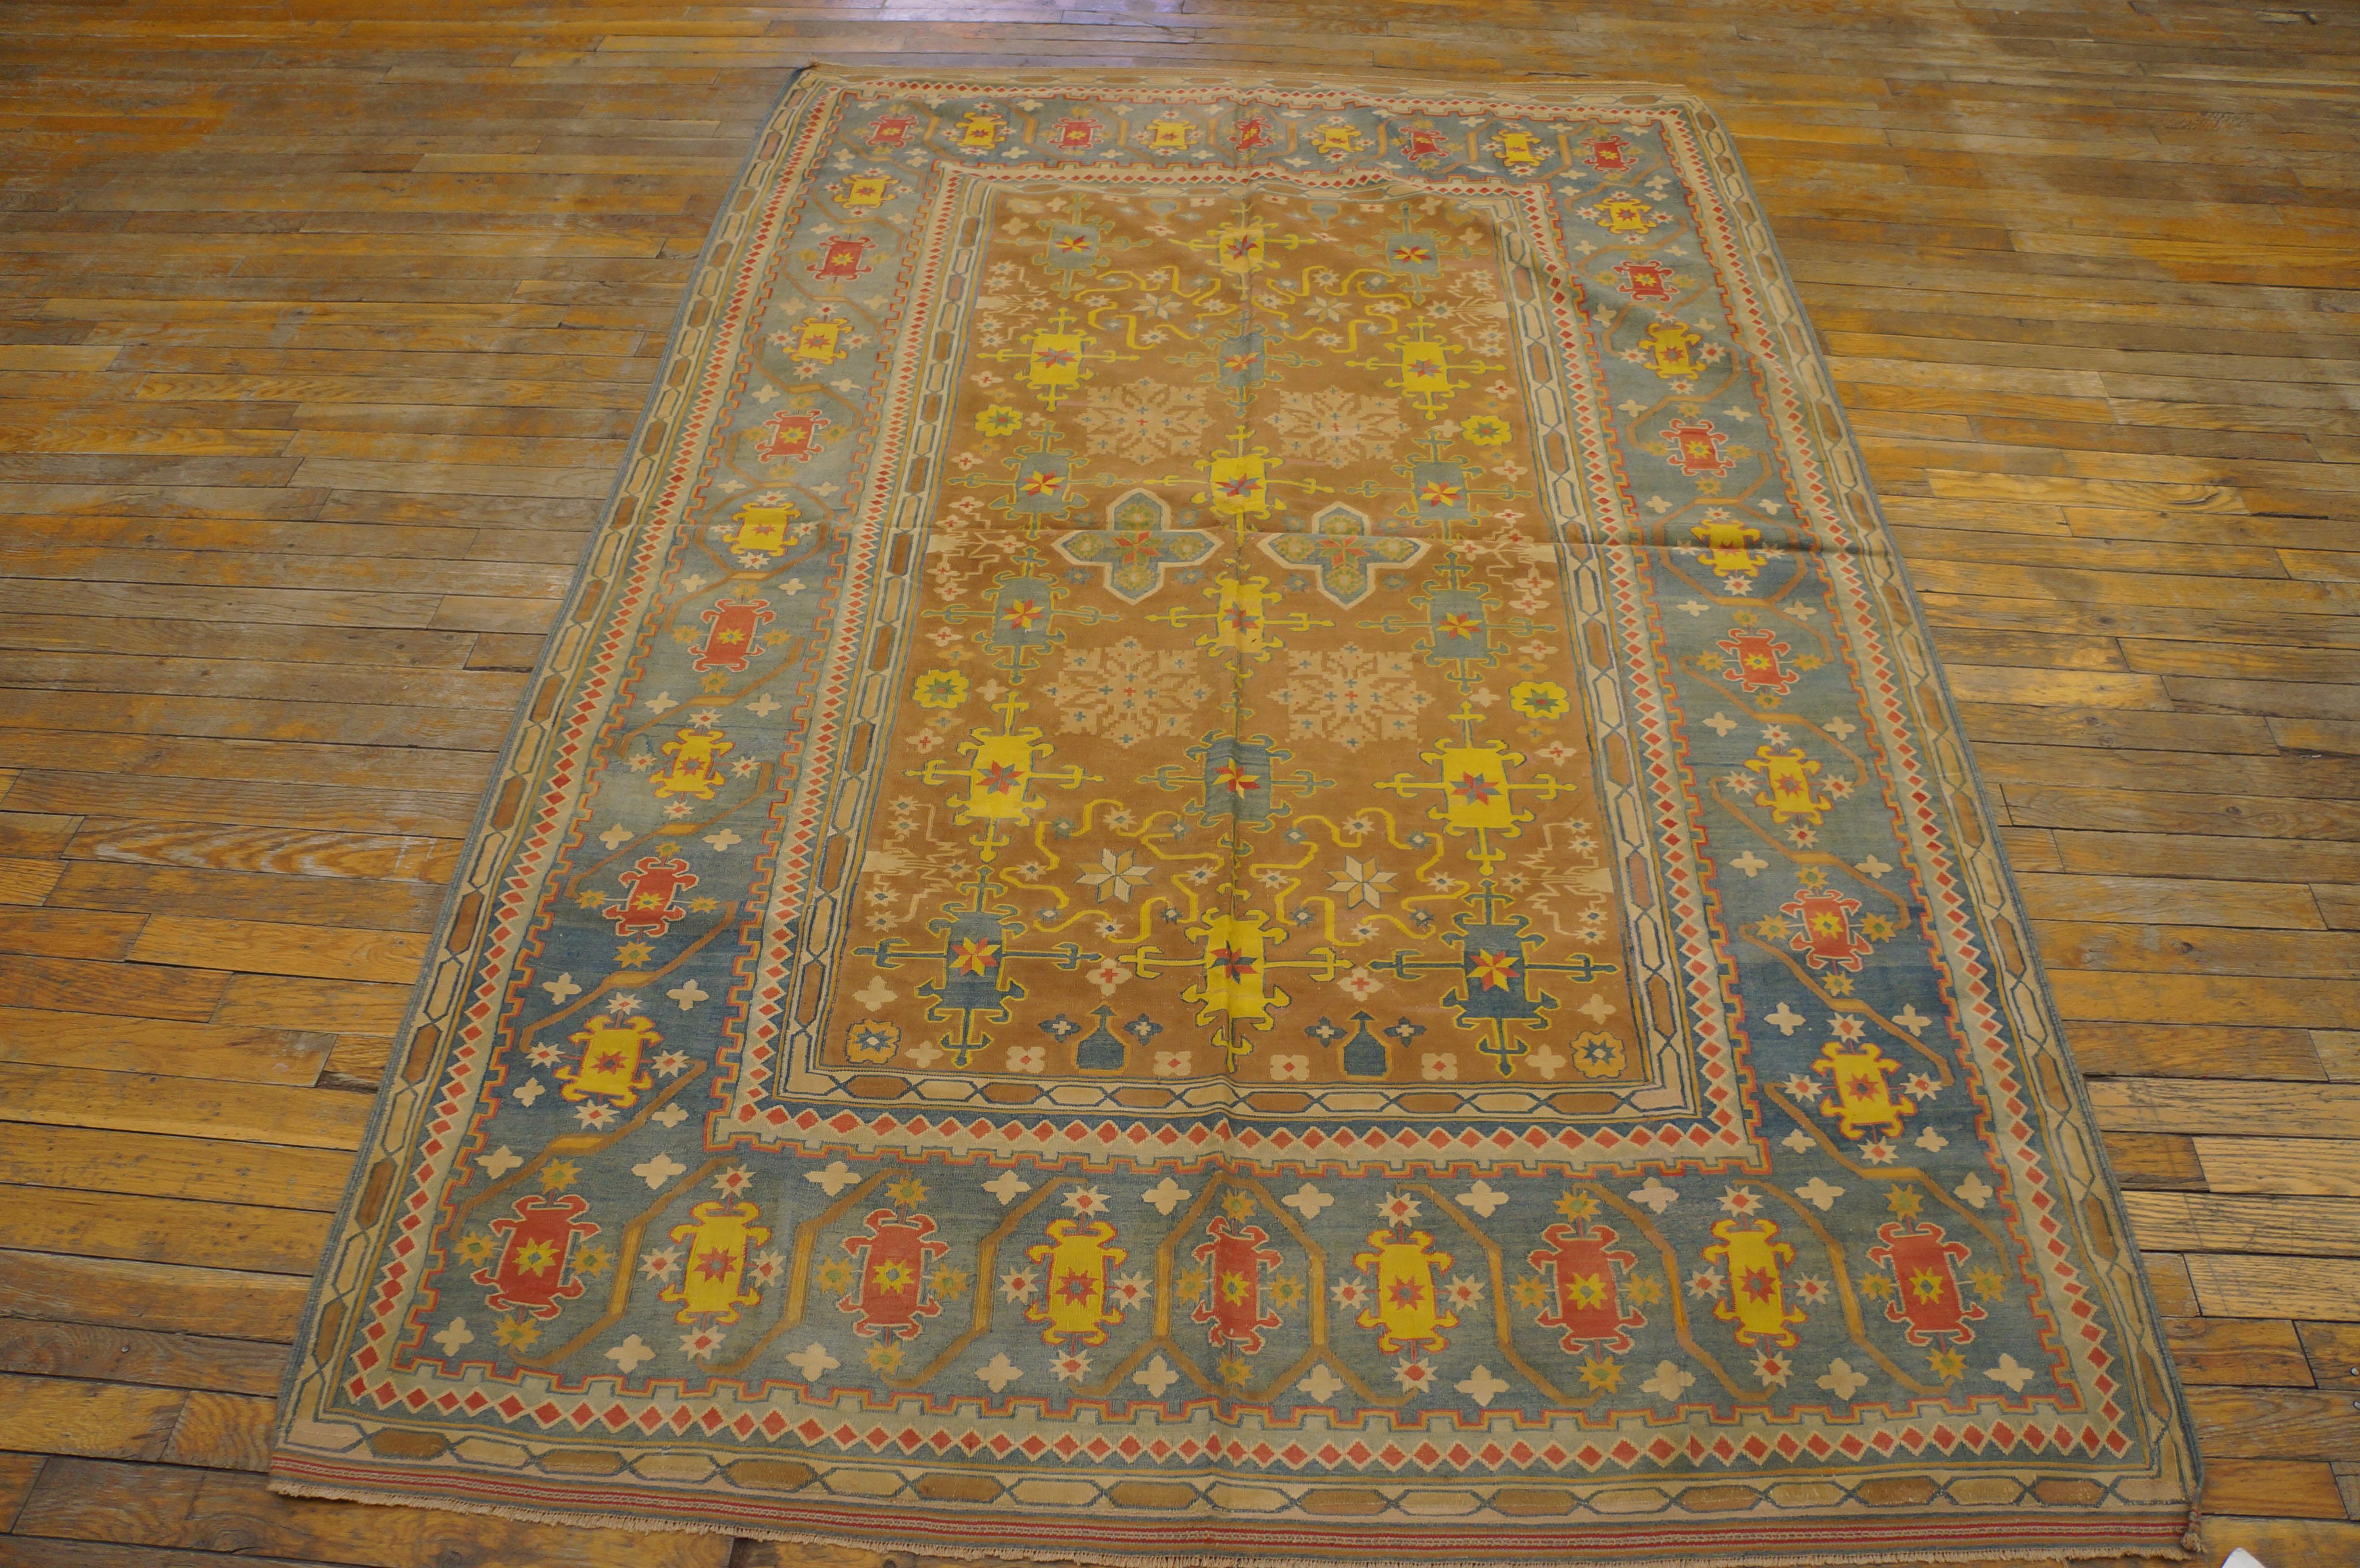 The soft camel-tone ground of this antique all cotton flat-woven scatter presents a pinwheel, octogramme and cruciform allover mixed pattern detailed in yellow, light blue and light green. The main border attractively abrashes from pale blue to